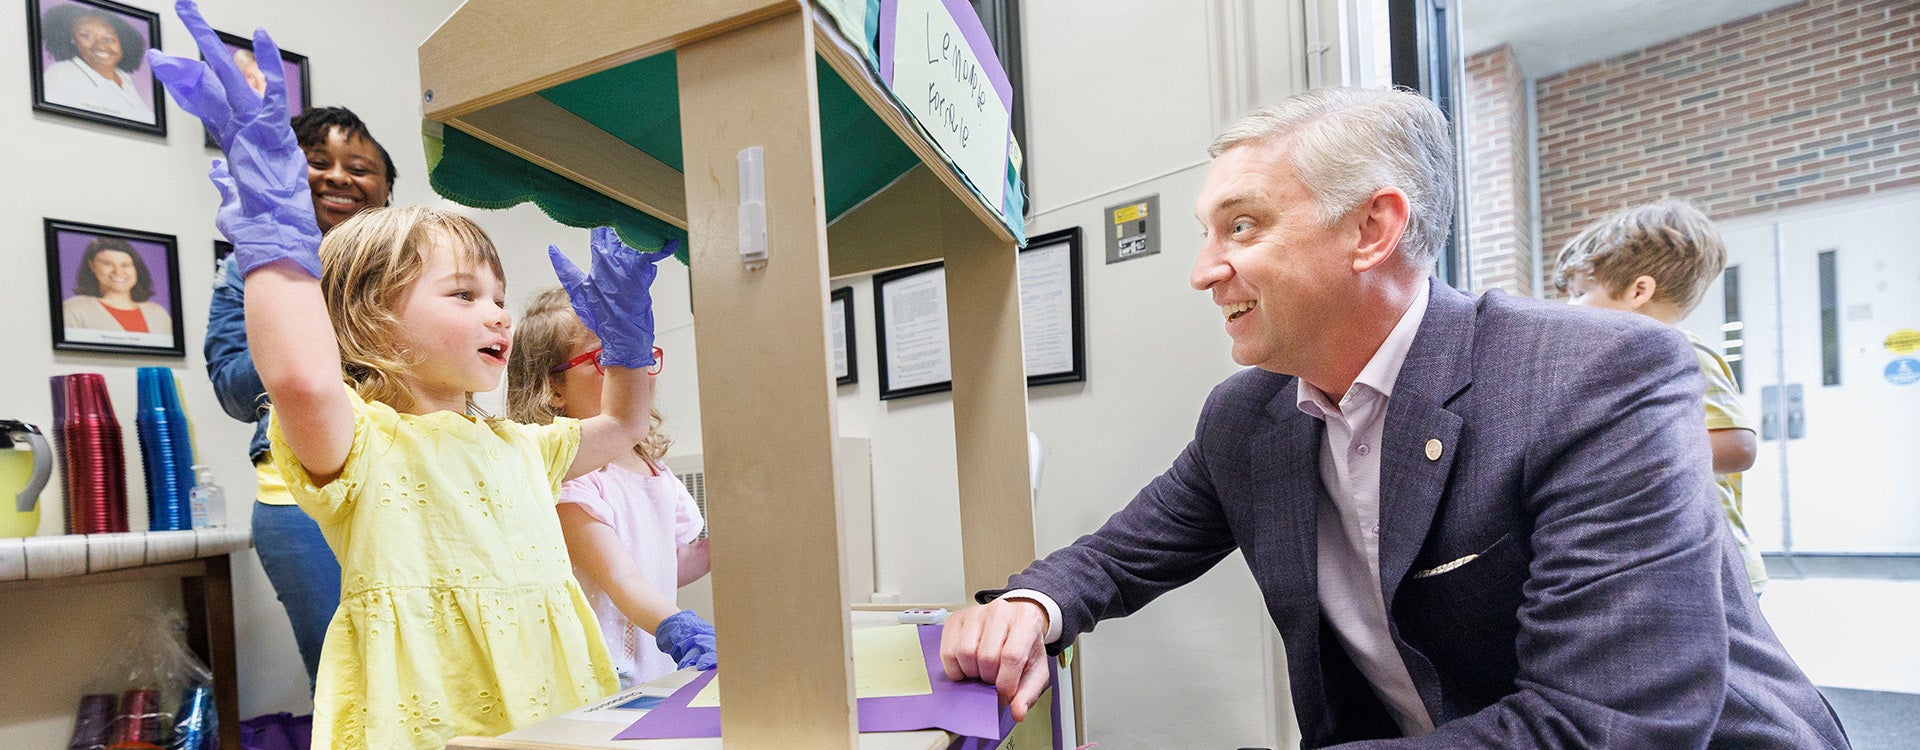 ECU Chancellor Philip Rogers smiles while visiting the Preschool 4 class lemonade stand to benefit Purple Pantry event held at the Nancy Darden Child Development Center.